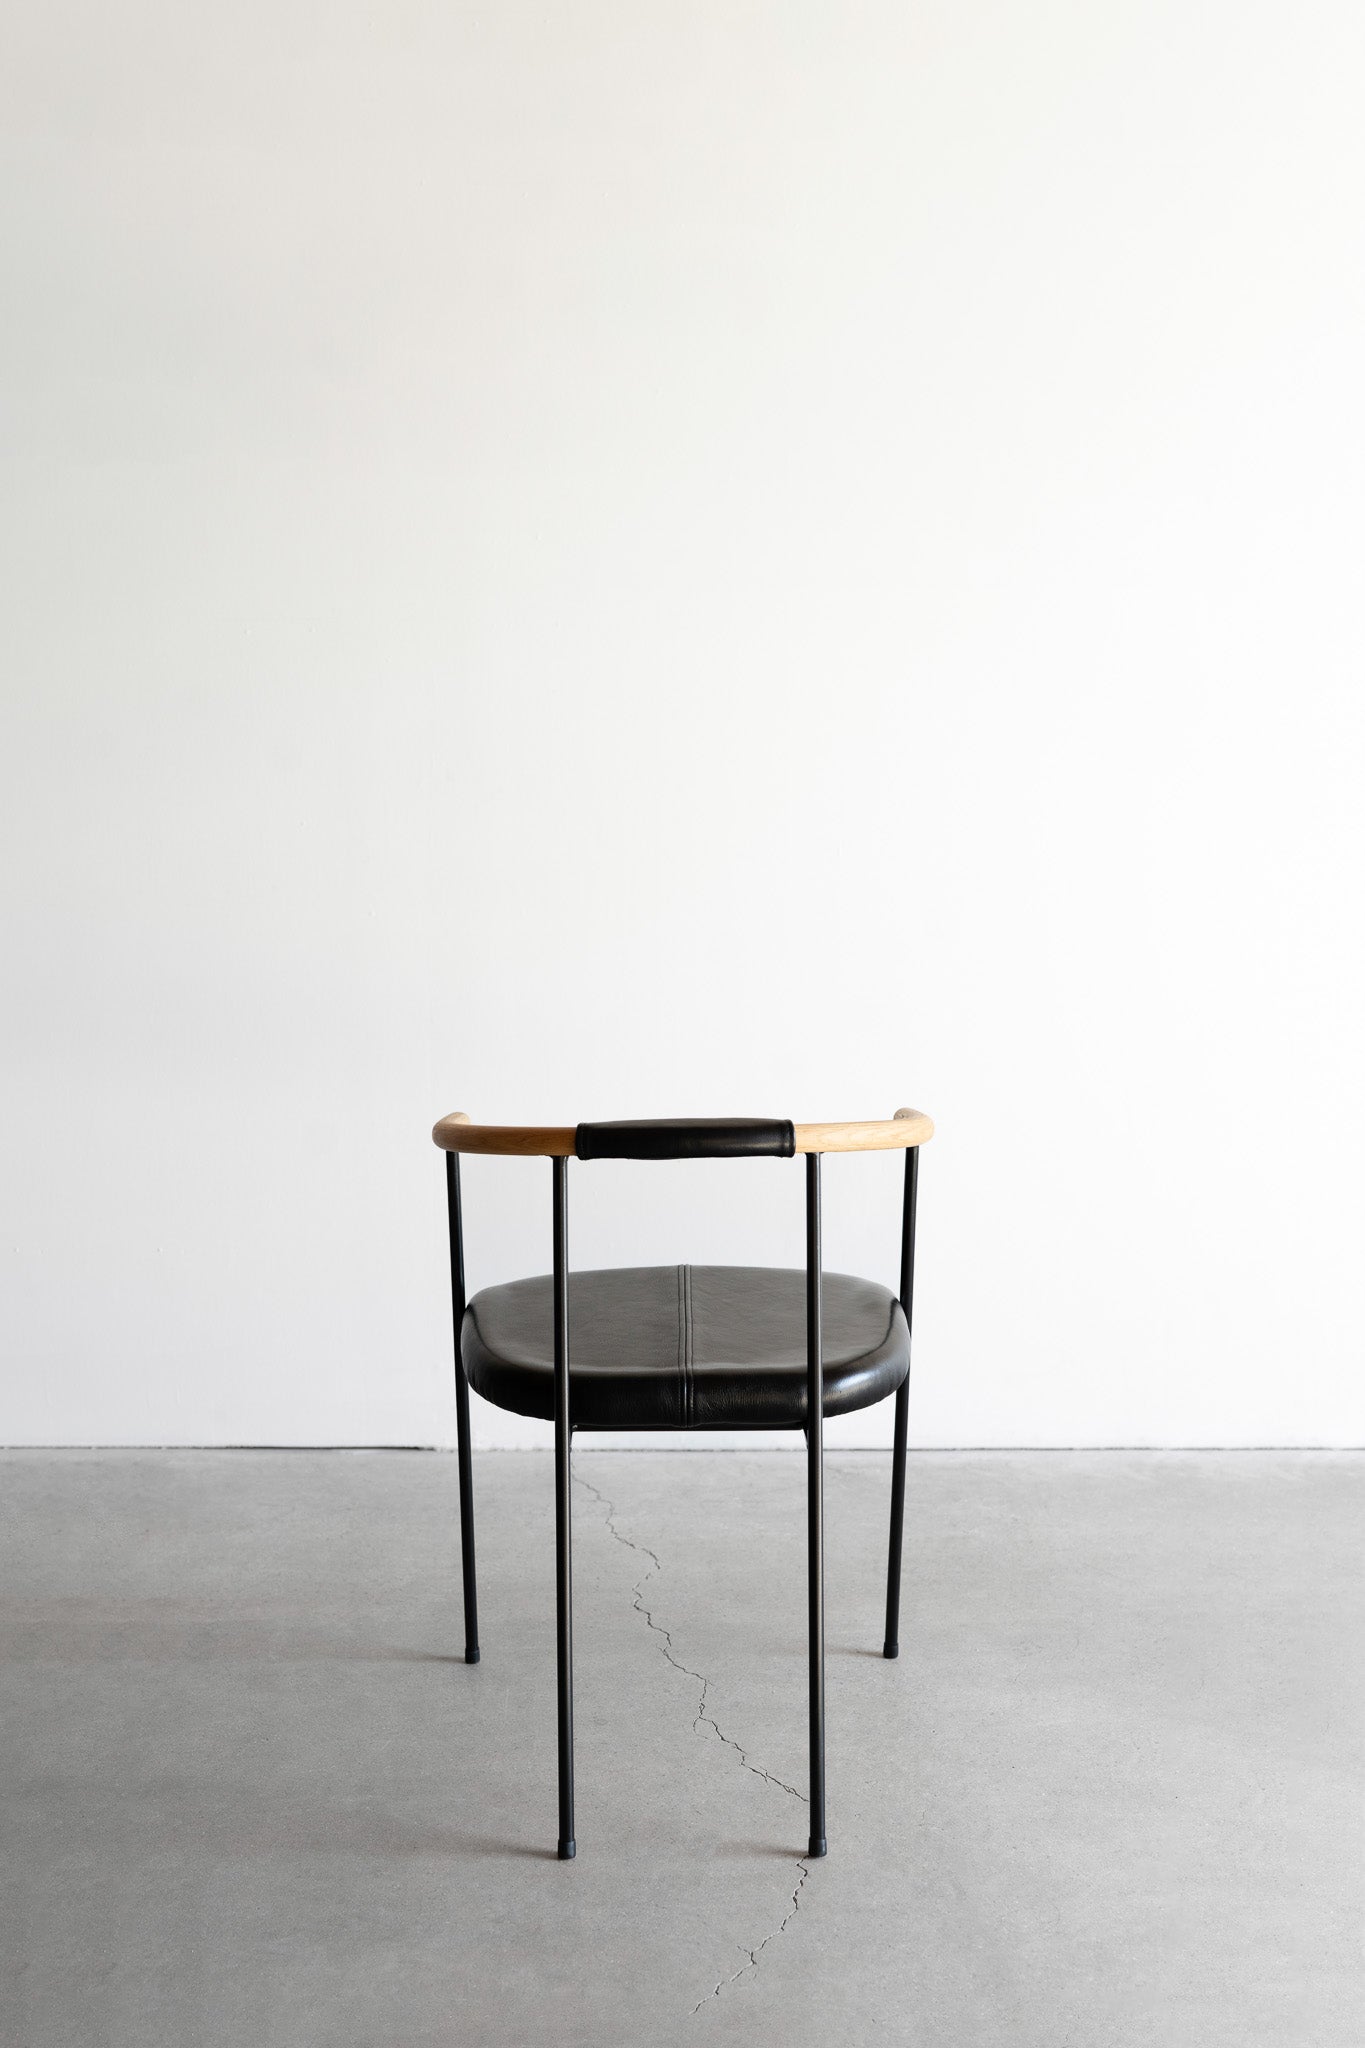 Cleo Dining Chair